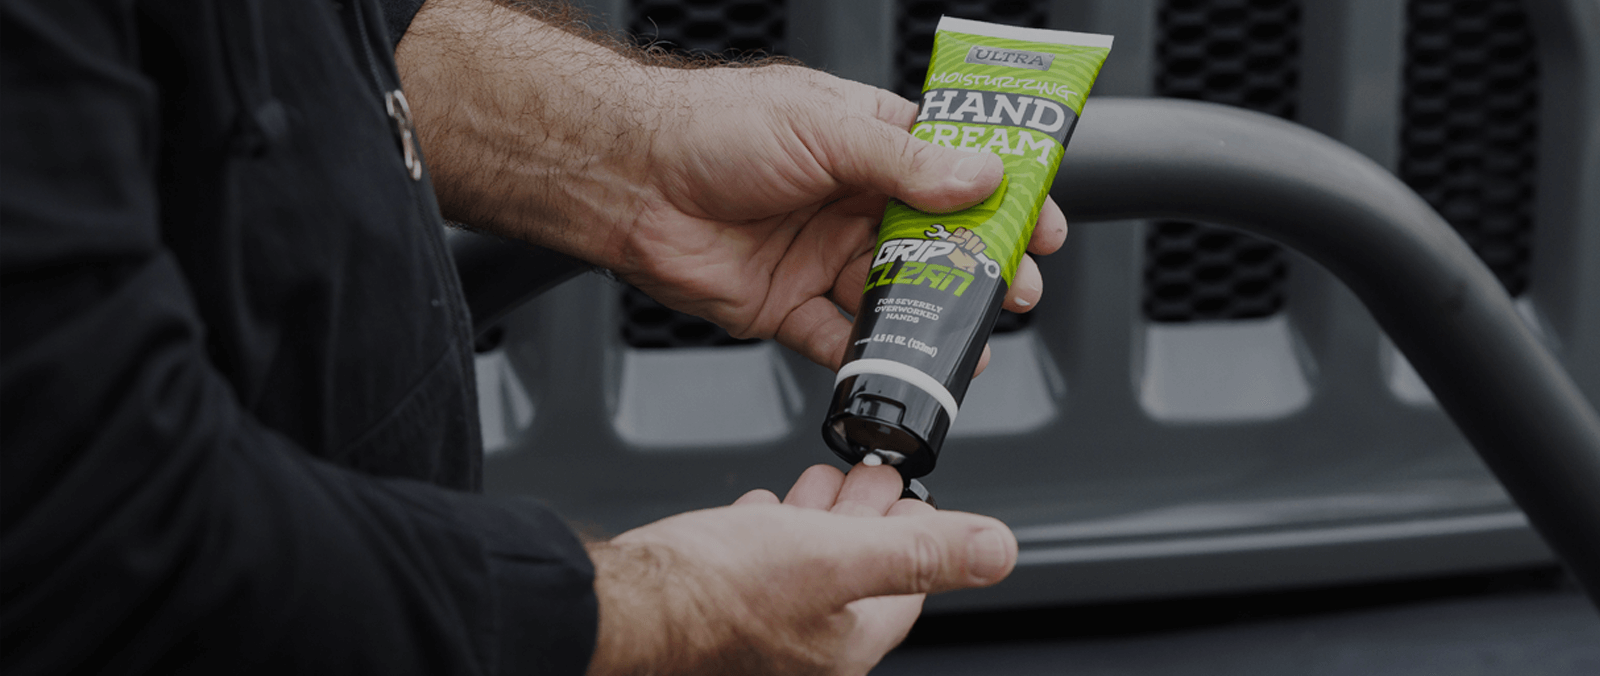 Grip Clean | Degreaser Hand Cleaner for Auto Mechanics - Dirt-Infused  Liquid Hand Soap Absorbs Greas…See more Grip Clean | Degreaser Hand Cleaner  for